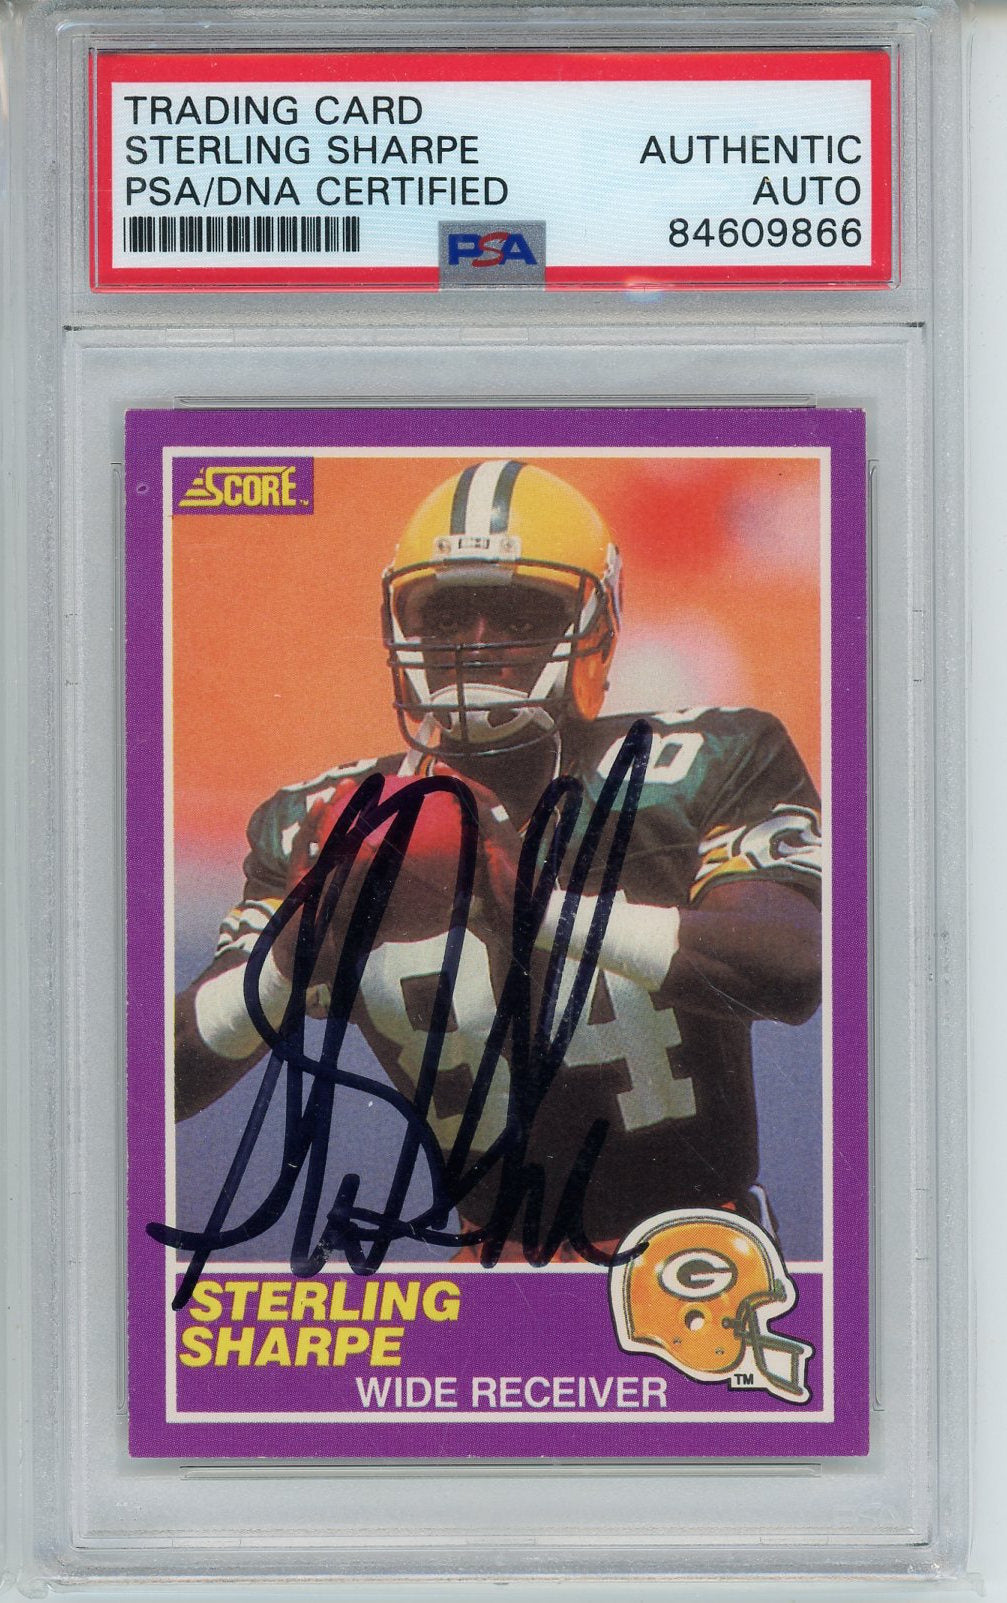 1989 SCORE SUPPLEMENTIAL STERLING SHARPE RC ROOKIE PSA DNA AUTO #333S